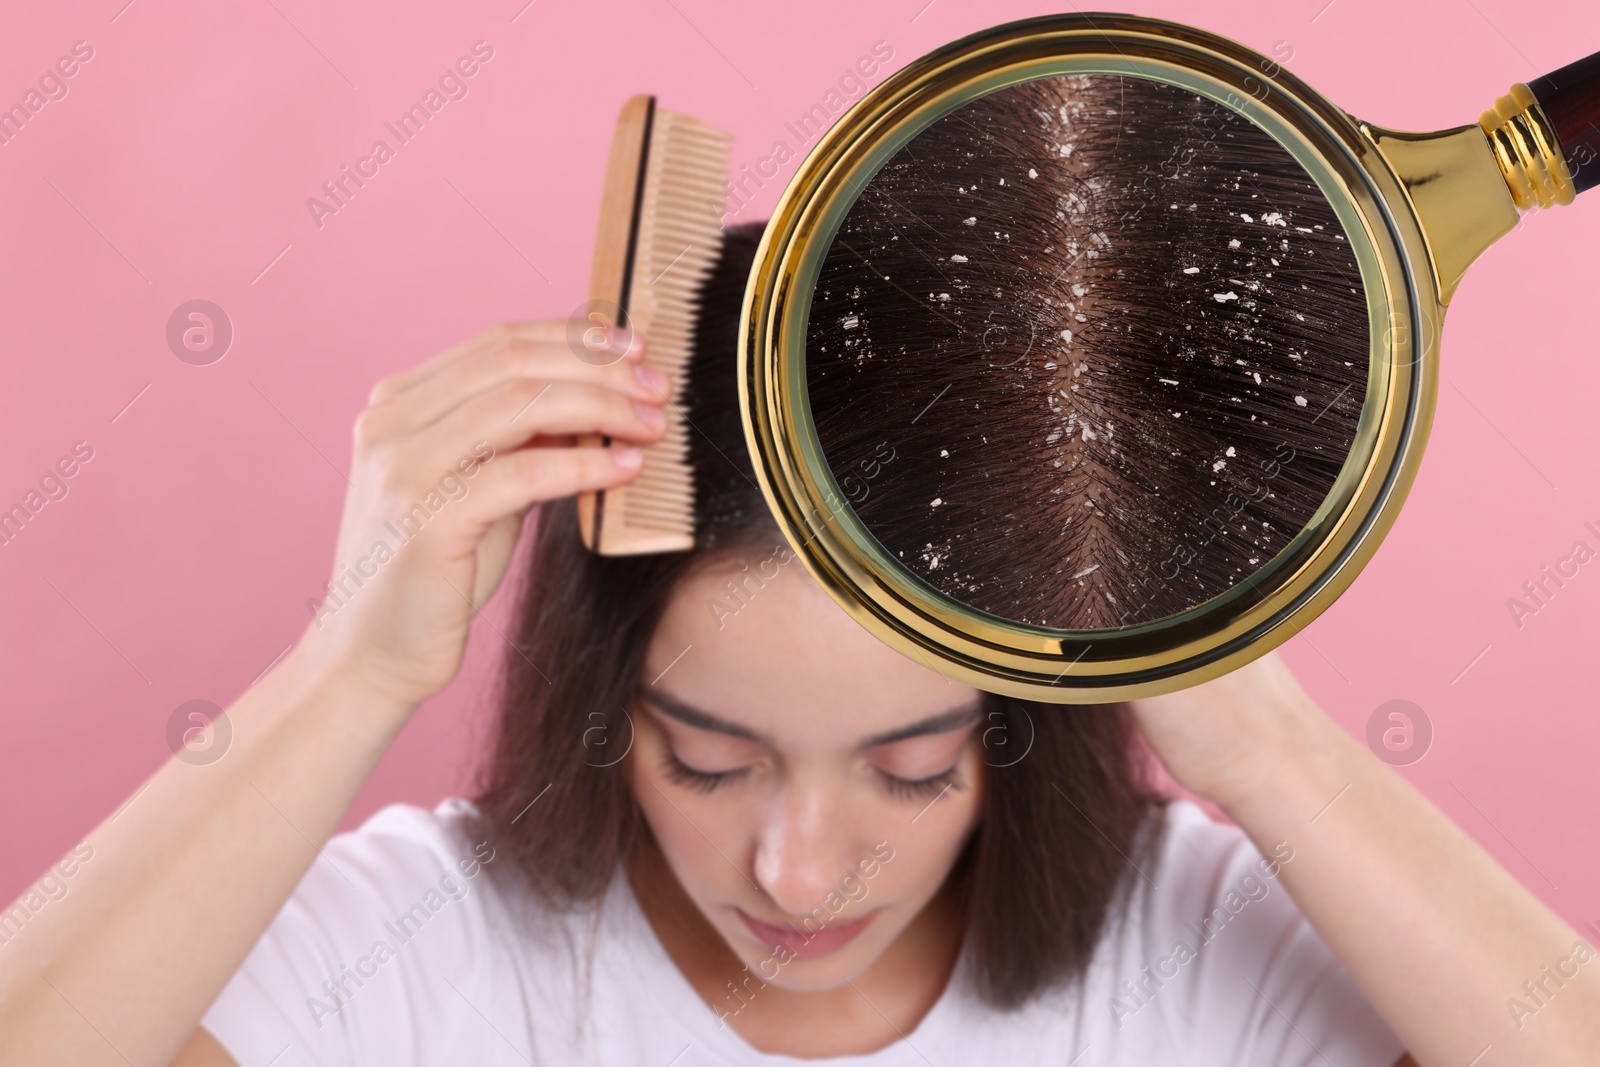 Image of Woman suffering from dandruff on pink background. View through magnifying glass on hair with flakes